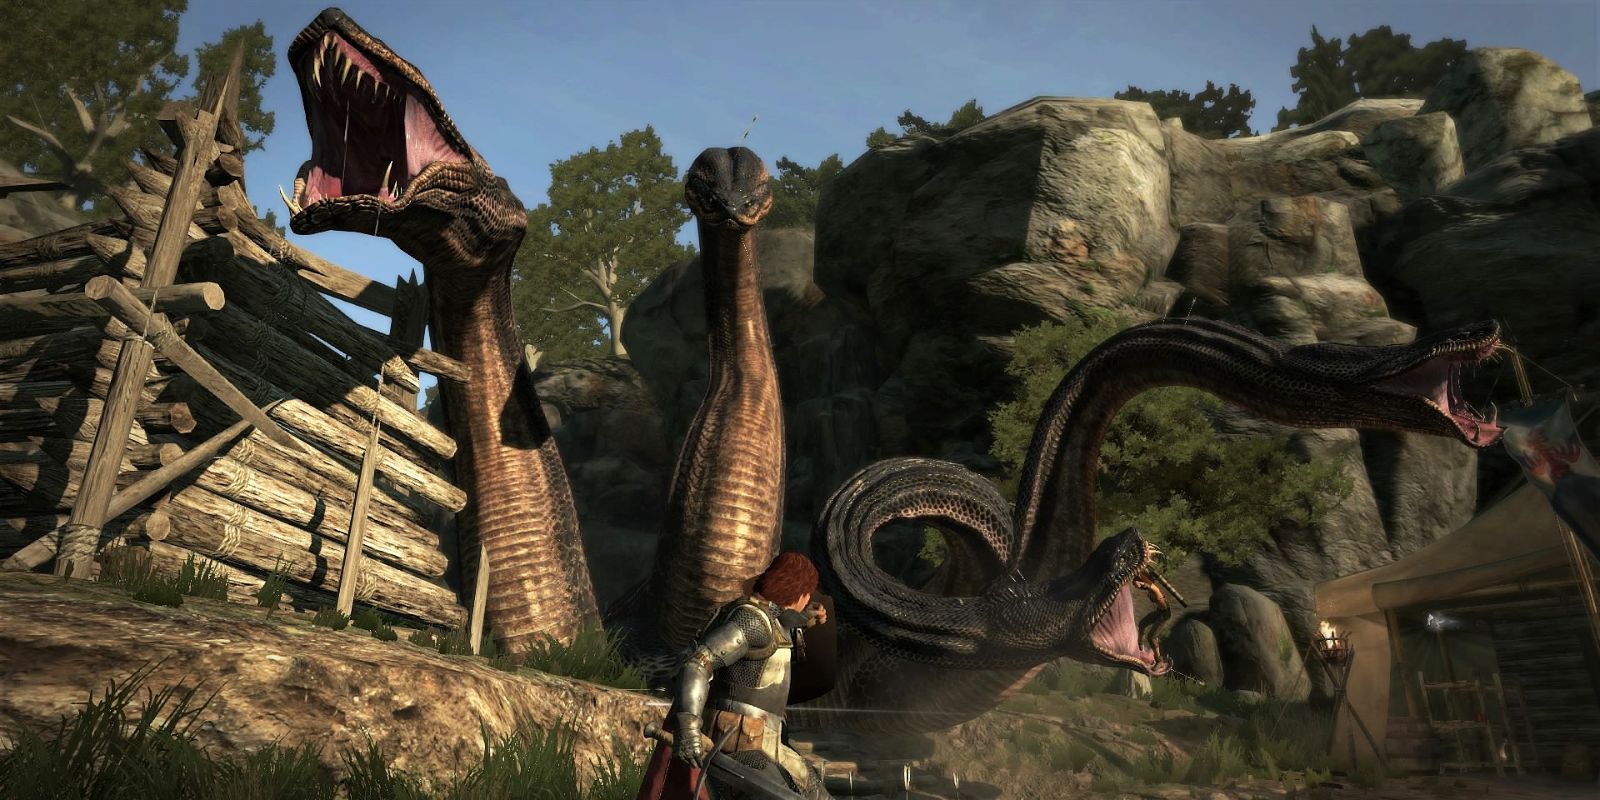 Dragon's Dogma 2 Officially Confirmed to be in Development